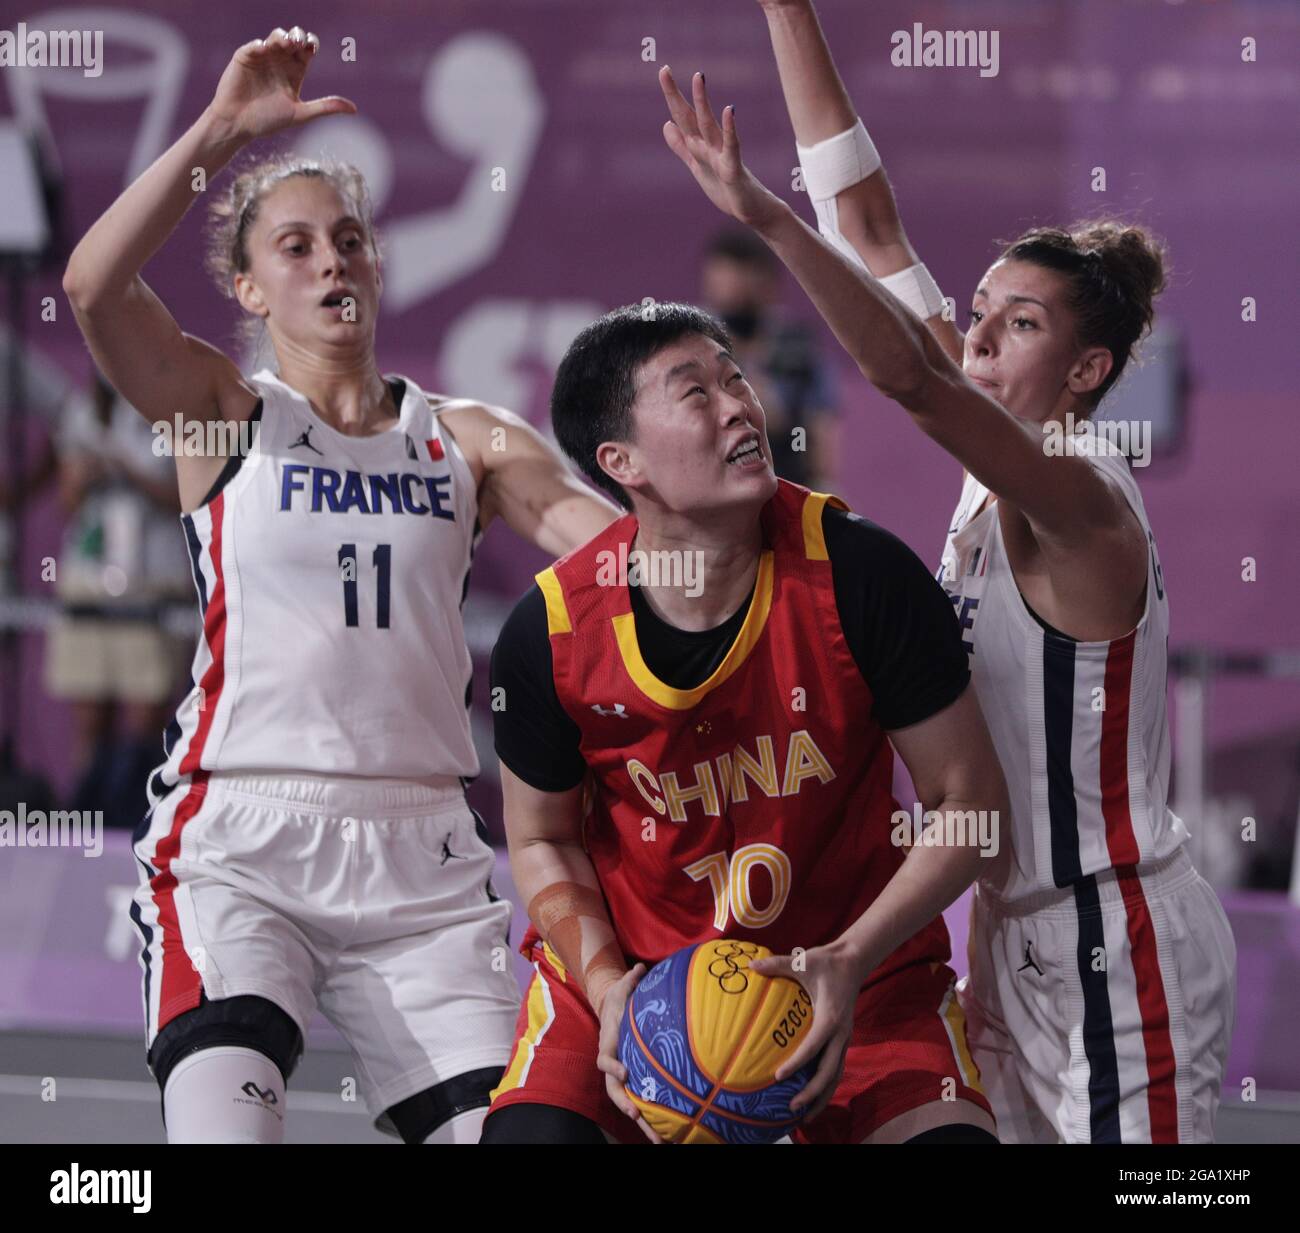 Tokyo, Japan. 28th July, 2021. China's Zhiting Zhang (10) is guarded by Ana Maria Filip of France (11) and Laetitia Guapo during the Women's 3X3 Basketball bronze medal game at the Tokyo Summer Olympics in Tokyo, Japan, on Wednesday, July 28, 2021. China won the game to take the bronze medal. Photo by Bob Strong/UPI. Credit: UPI/Alamy Live News Stock Photo